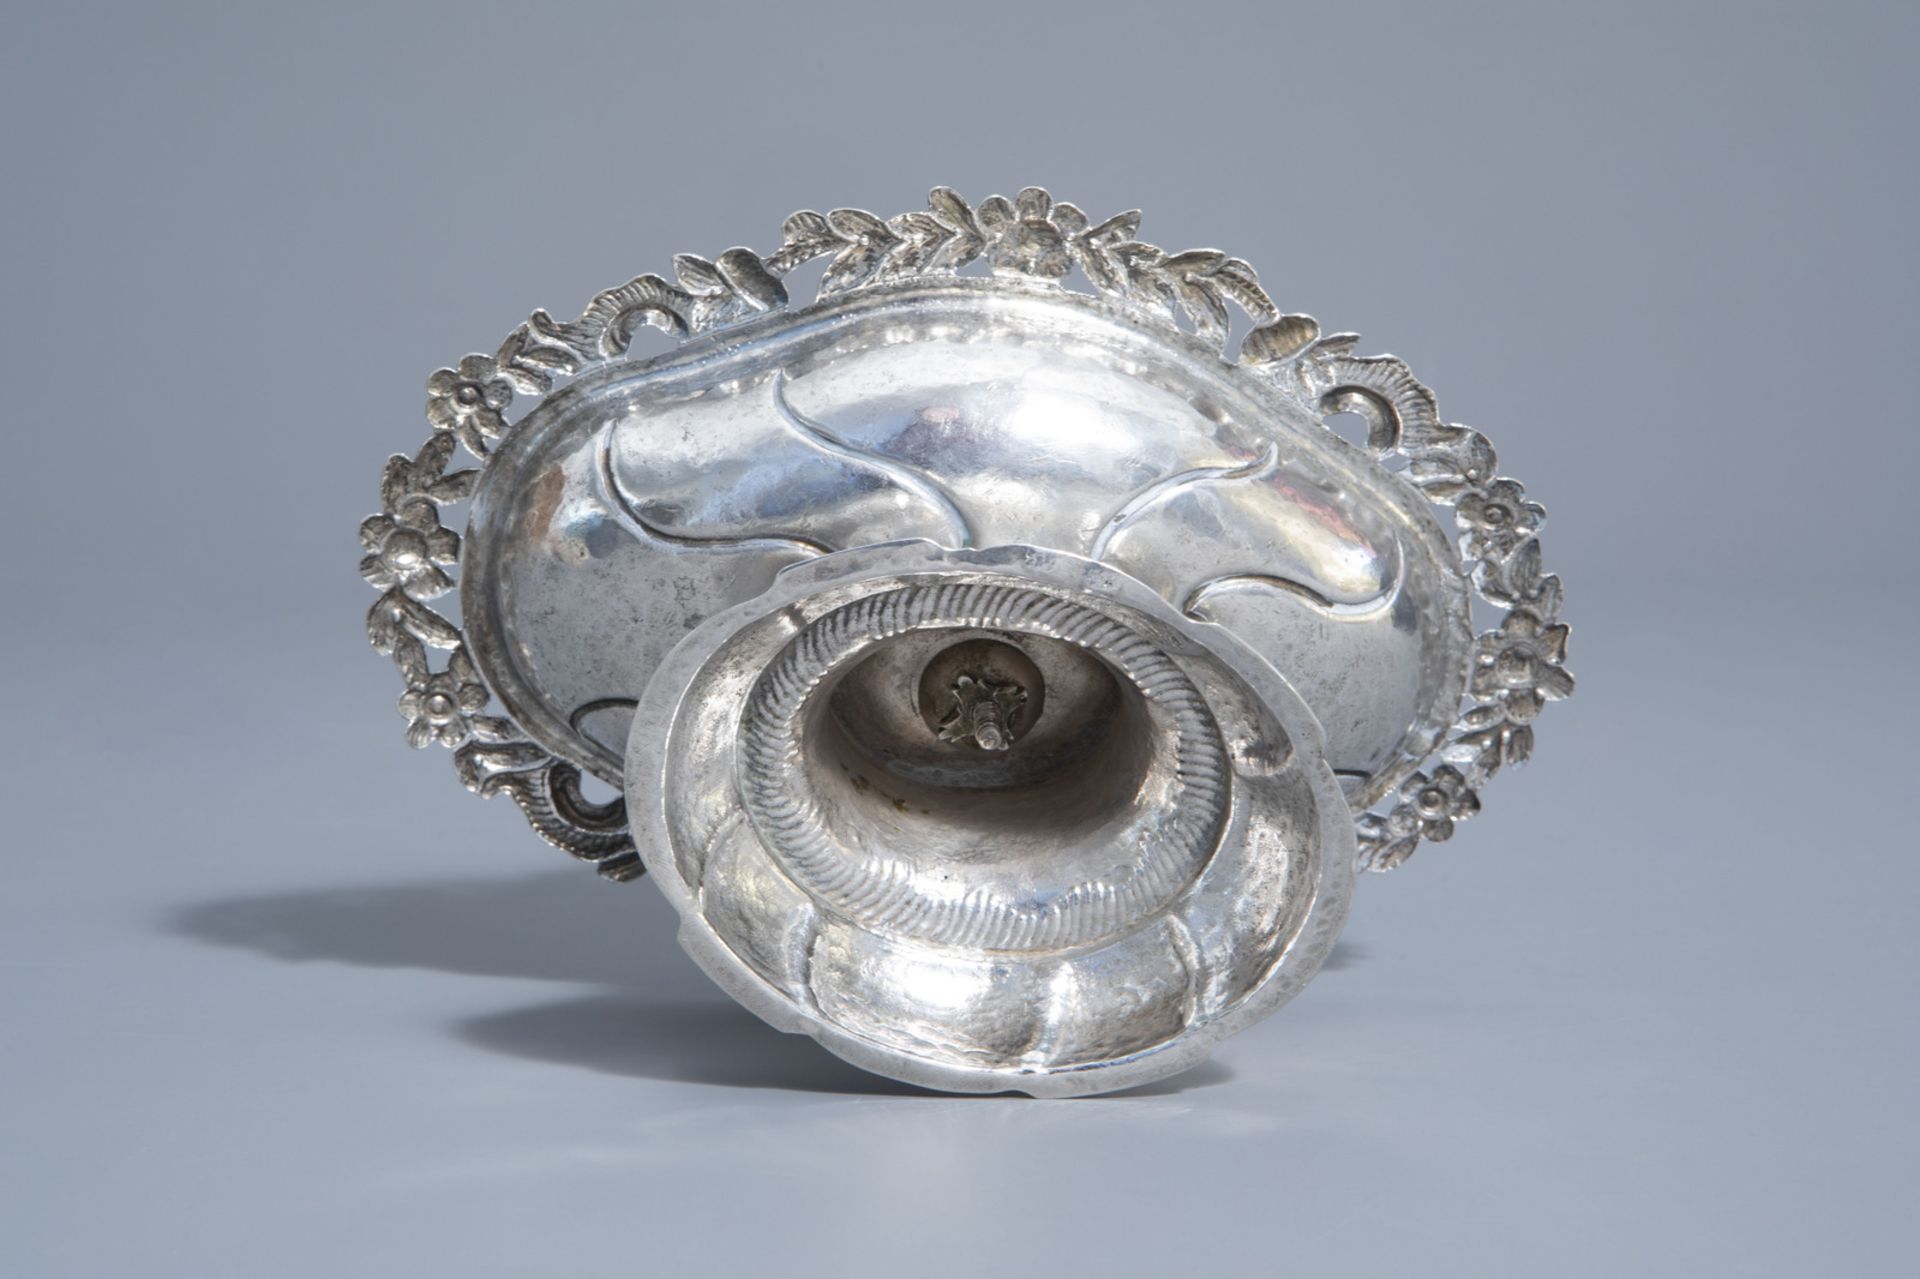 A silver centerpiece with floral design, Germany, probably Zwickau, maker's mark I.M. (?), 19th C. - Image 8 of 15